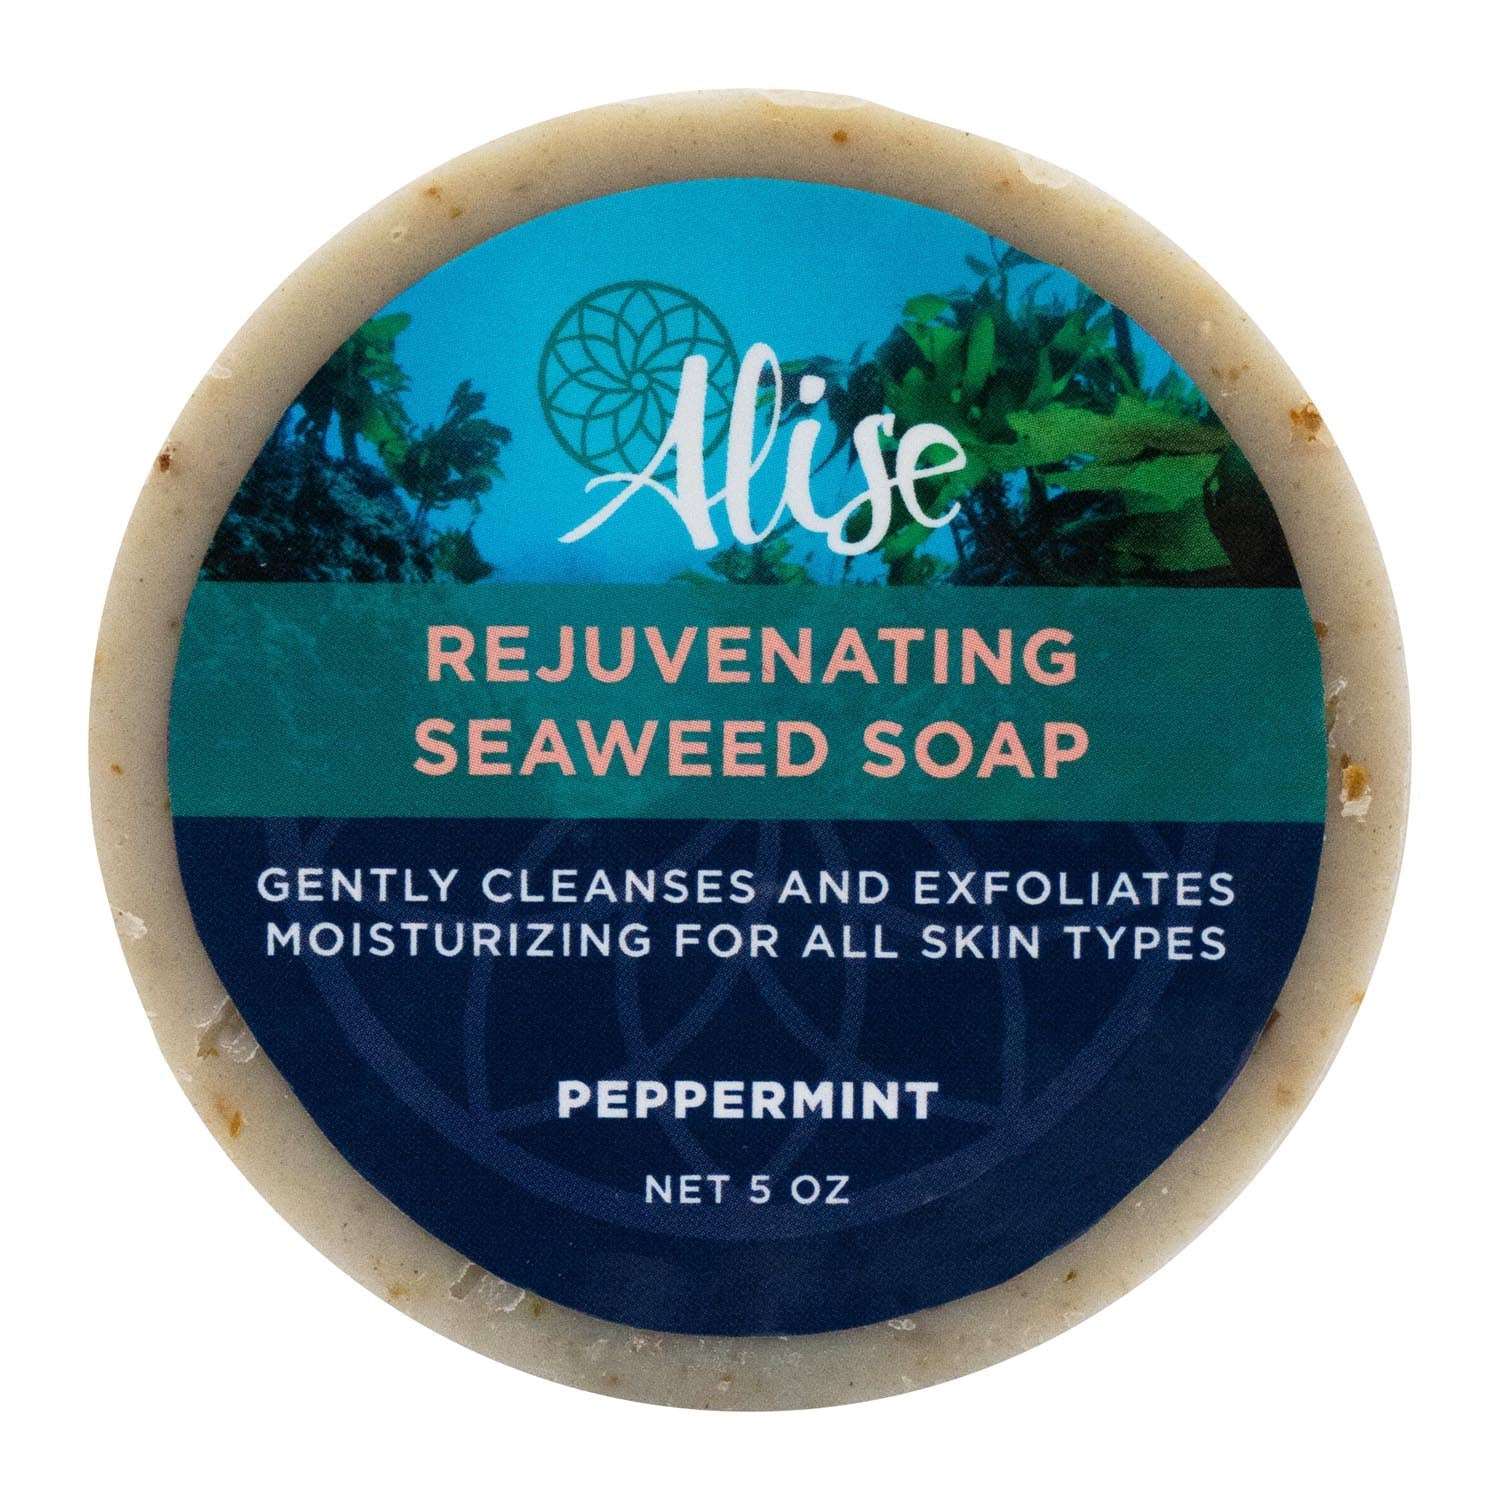 Rejuvenating Seaweed Soap 5oz handcrafted by Alise Body Care